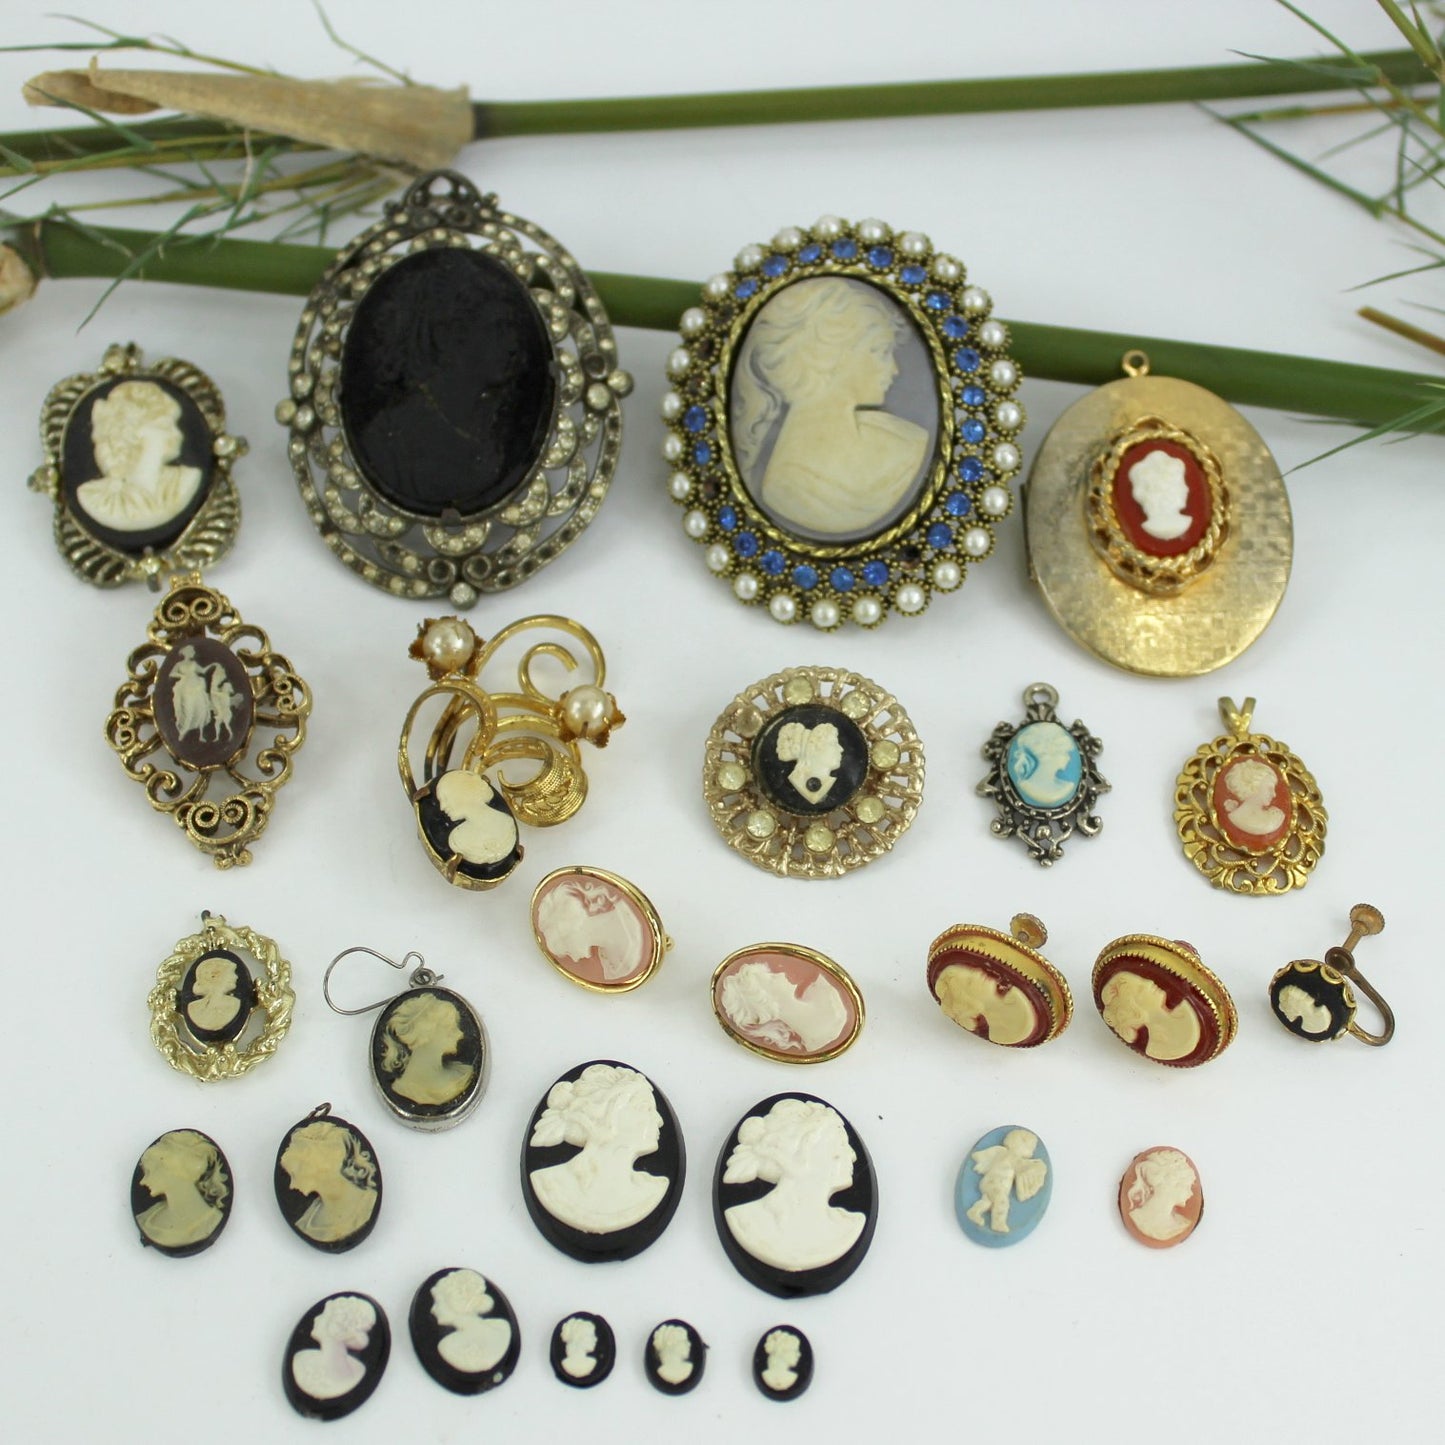 Collection Cameo Jewelry DIY Project Pins Earrings Lockets Repurpose